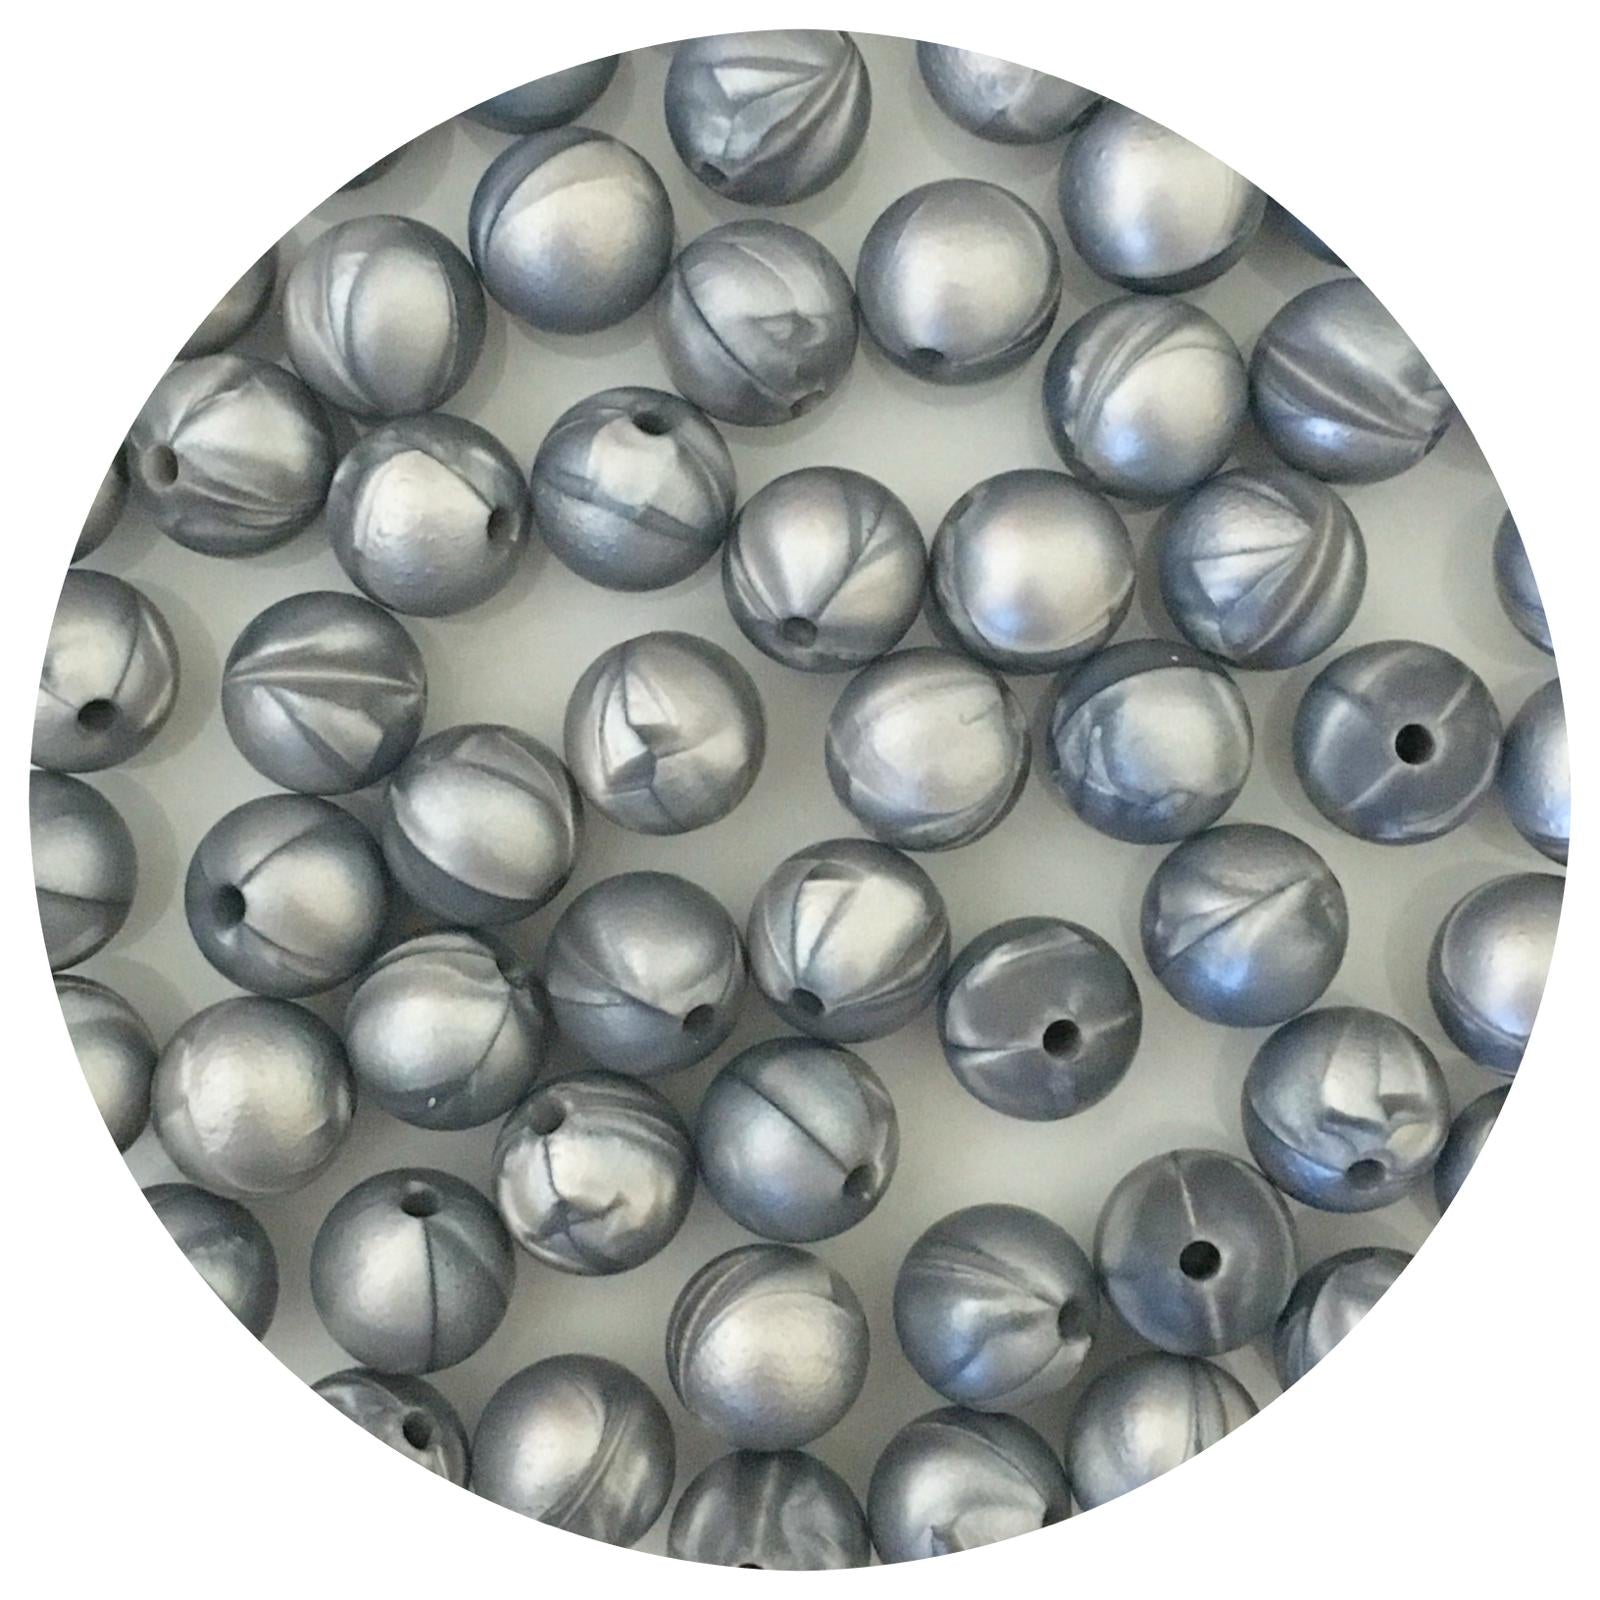 Metallic Silver - 12mm Round Silicone Beads - 10 beads